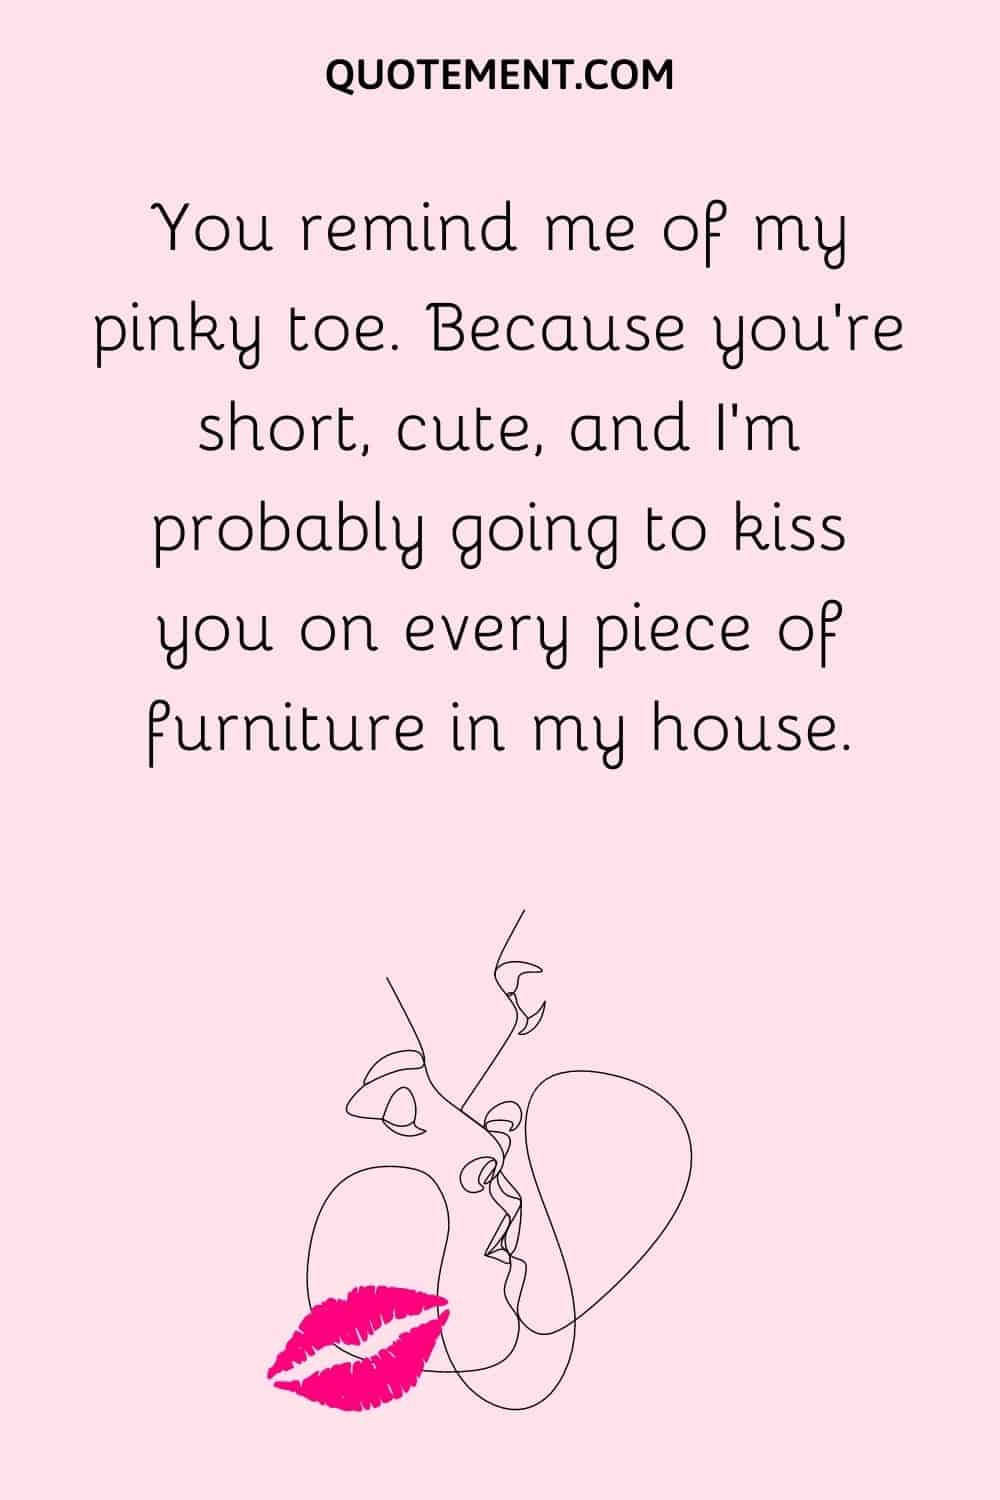 You remind me of my pinky toe